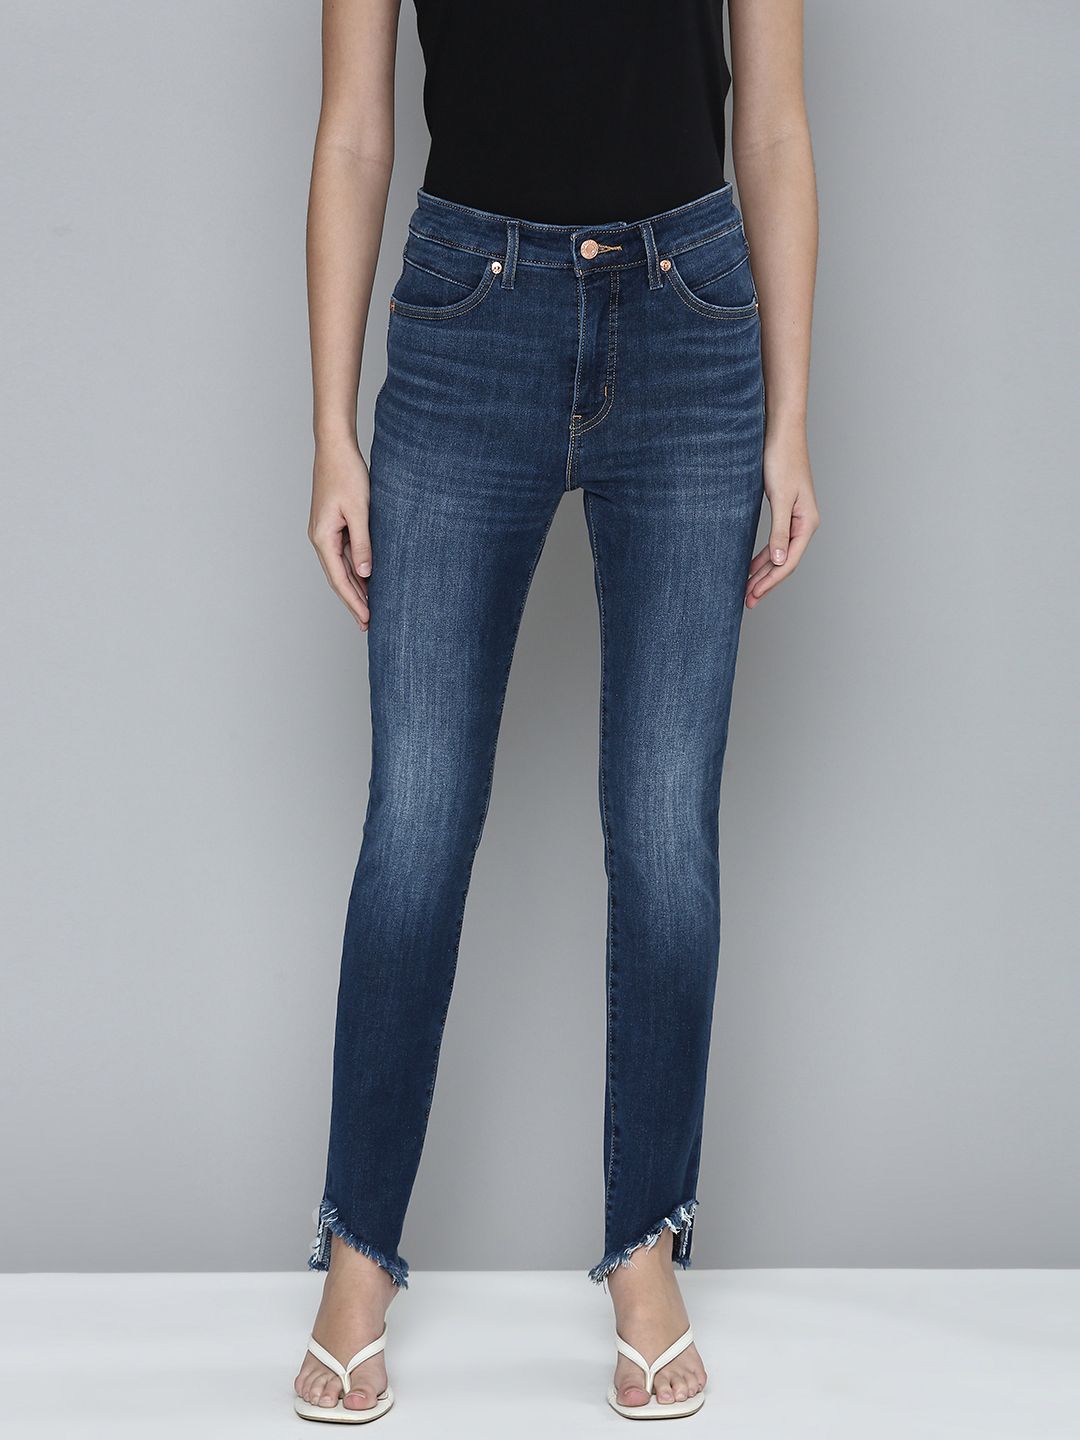 Levis Women Blue Skinny Fit High-Rise Light Fade Stretchable Jeans With Frayed Hem Price in India